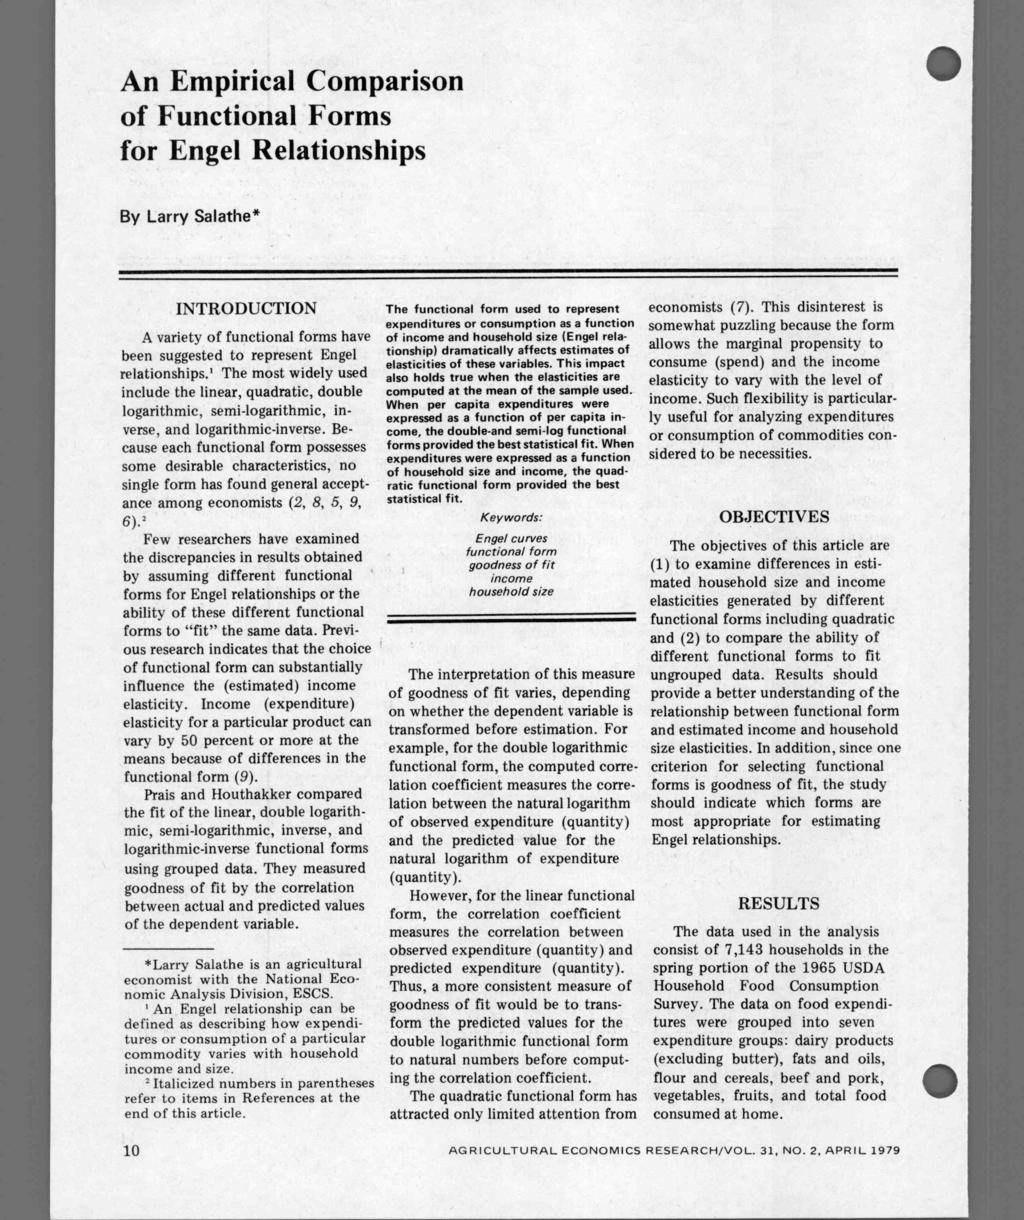 An Empirical Comparison of Functional Forms for Engel Relationships By Larry Salathe* INTRODUCTION A variety of functional forms have been suggested to represent Engel relationships.